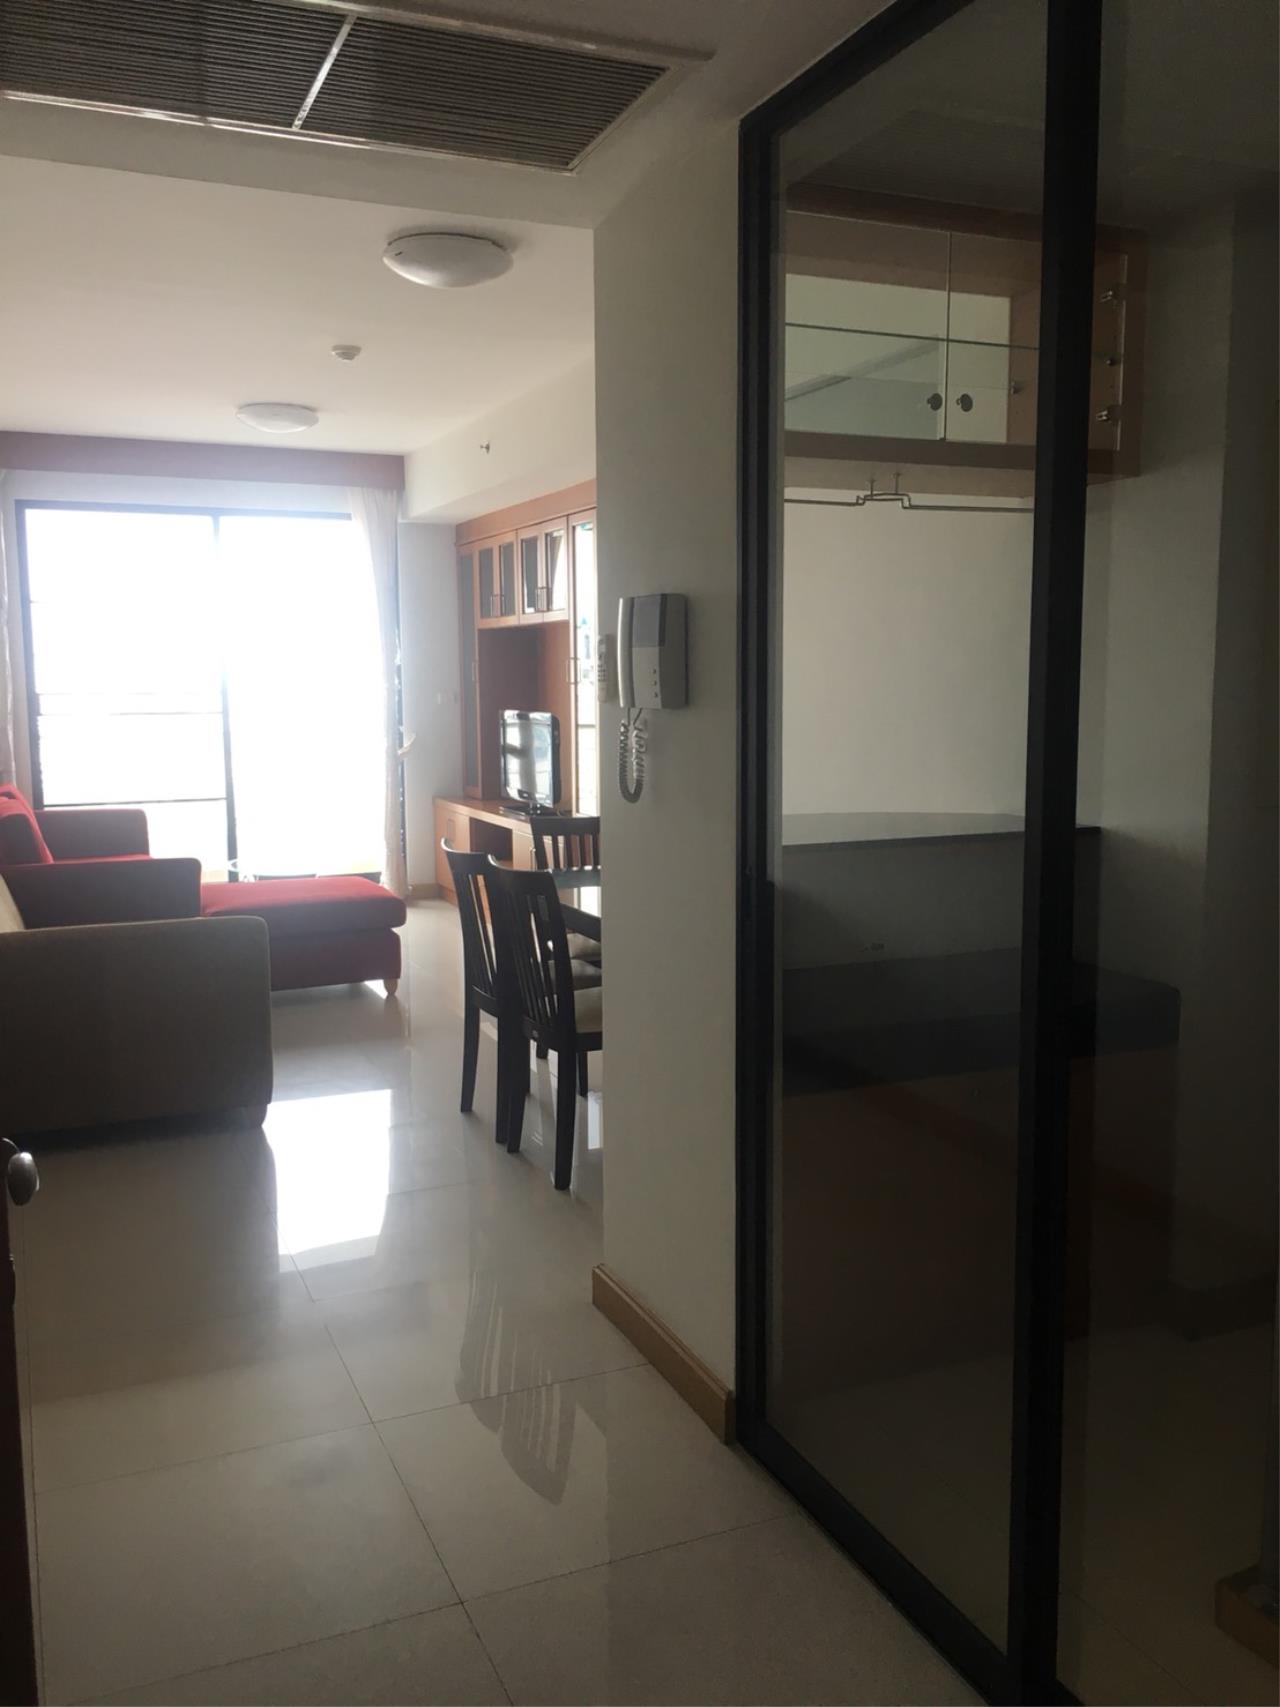 Quality Life Property Agency's 2 Bed For Rent At Supalai Premier Asoke, Modern And Nice Decorated Room On High Floor 20 2